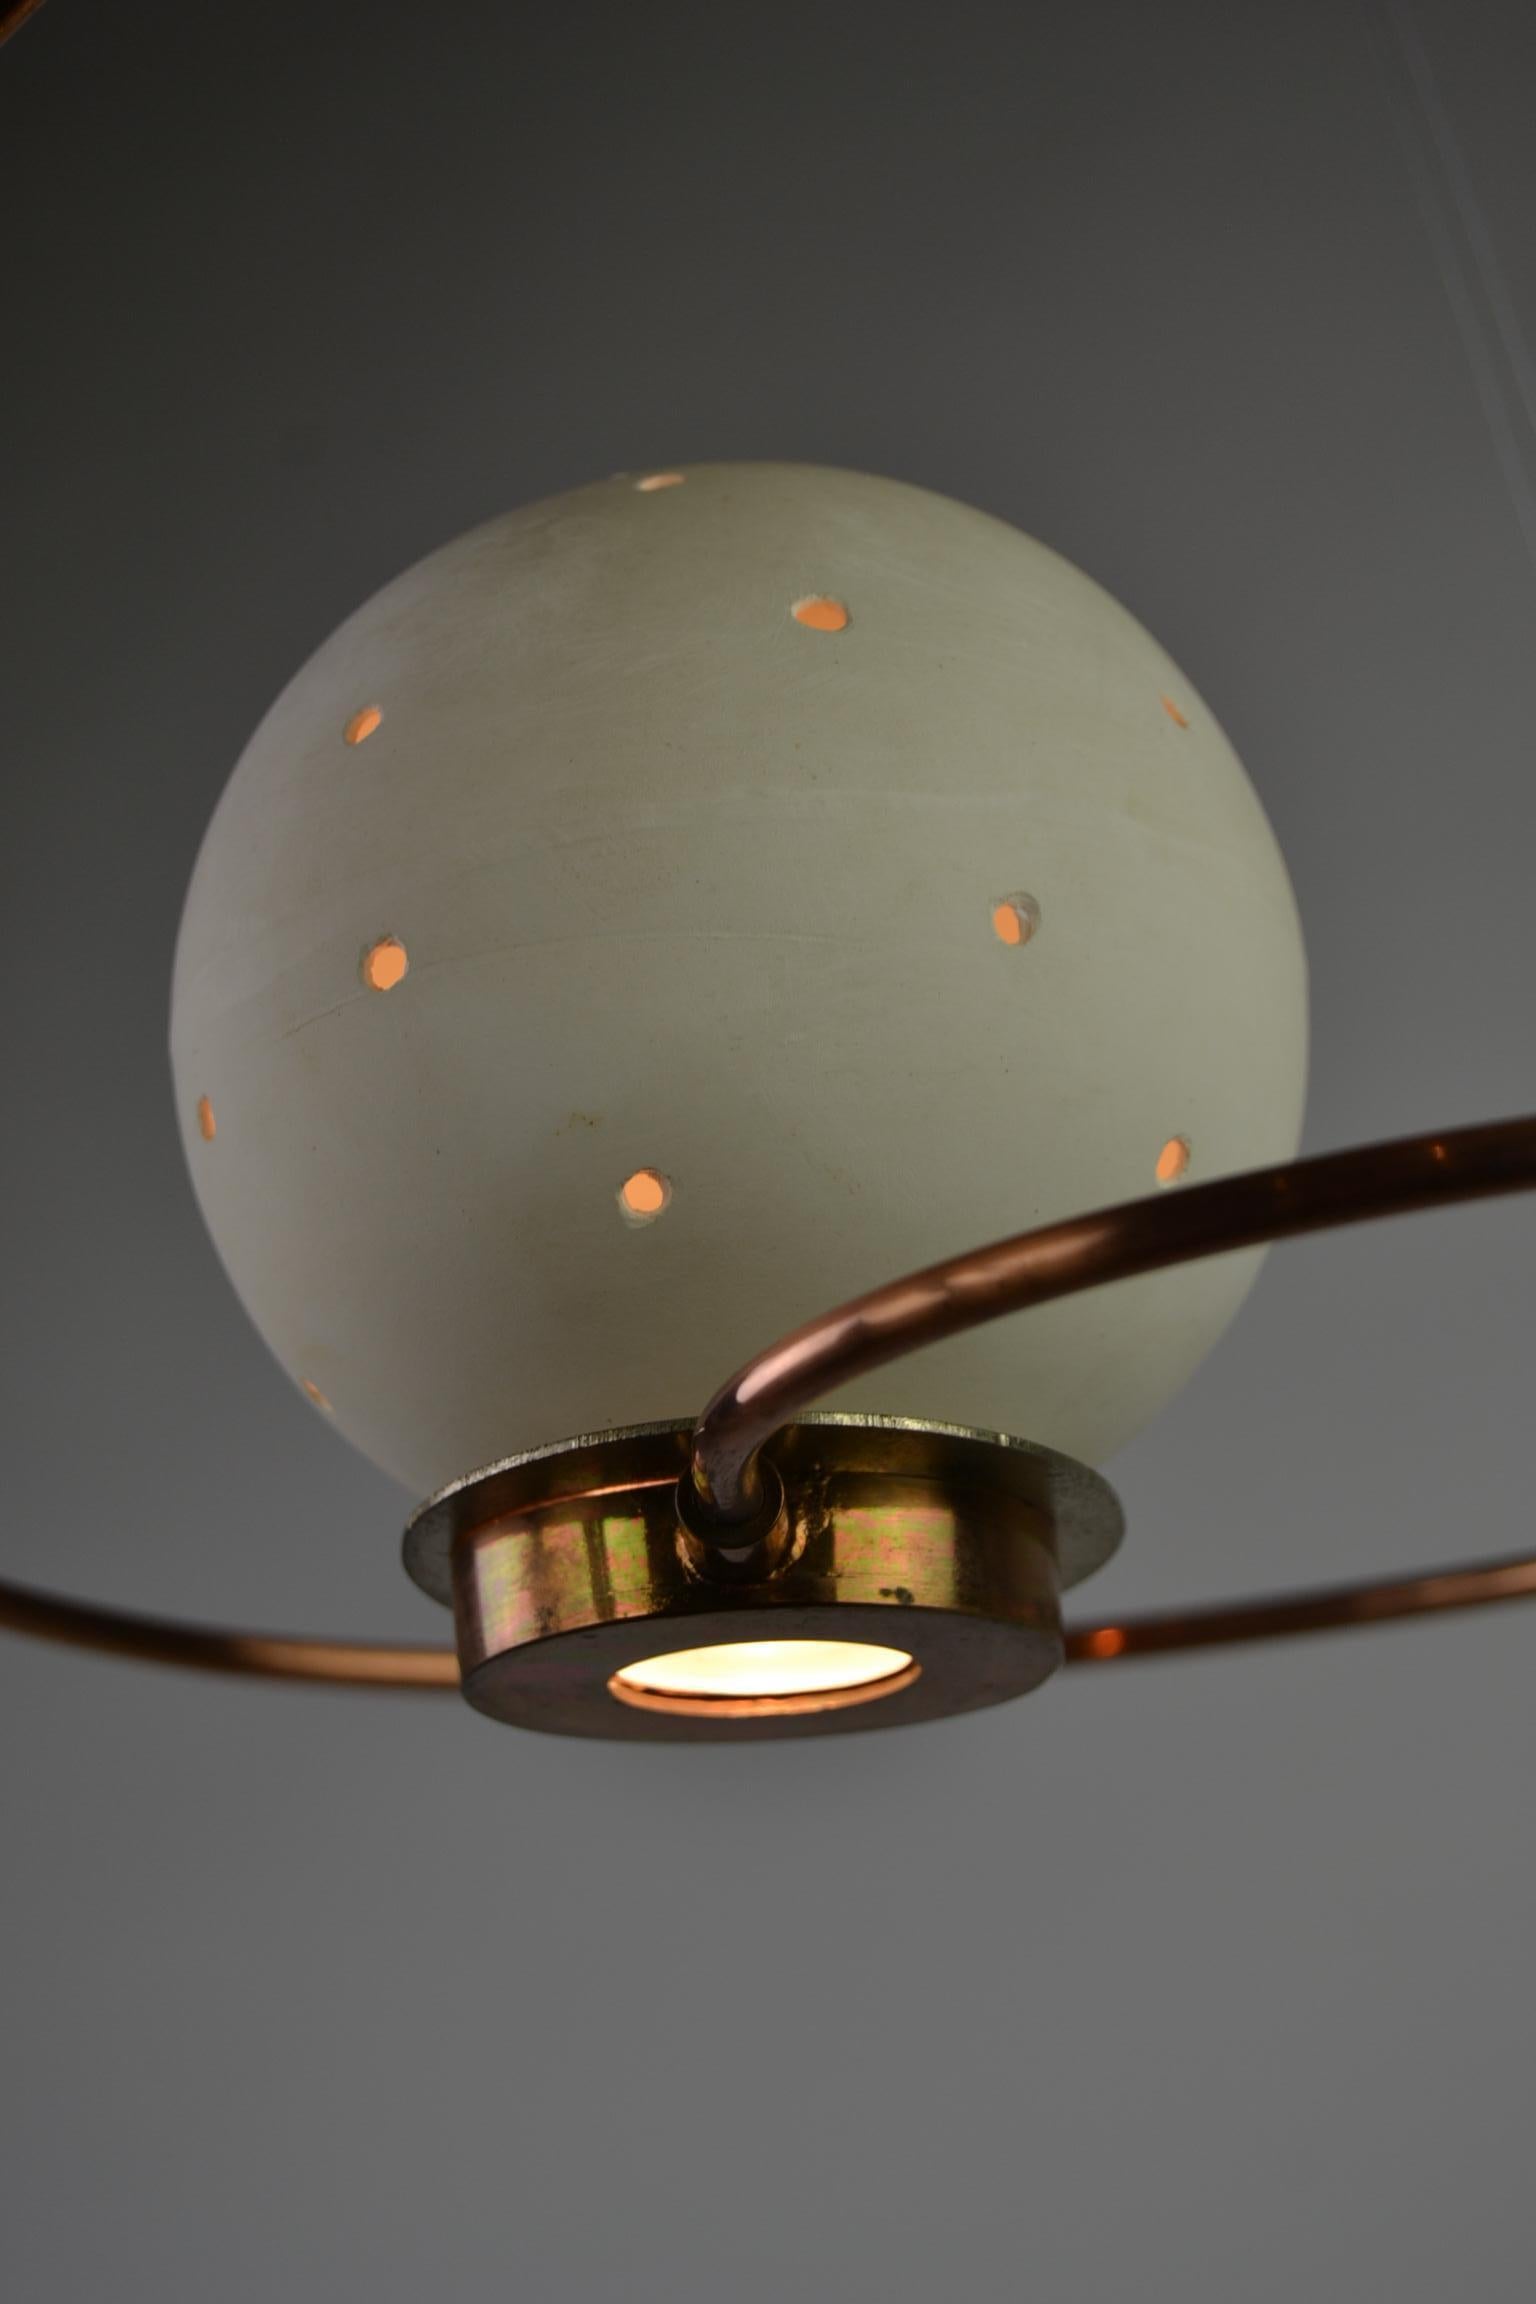 Vintage Futuristic - Space Age - Starry sky ceiling light from the 1980s.
This lamp is made from yellow Copper Cannula - Tube, 
with a white ceramic bulb - Spherical. 
The ceramic (4.72 inch - 12 cm diameter) has little holes, so gives the